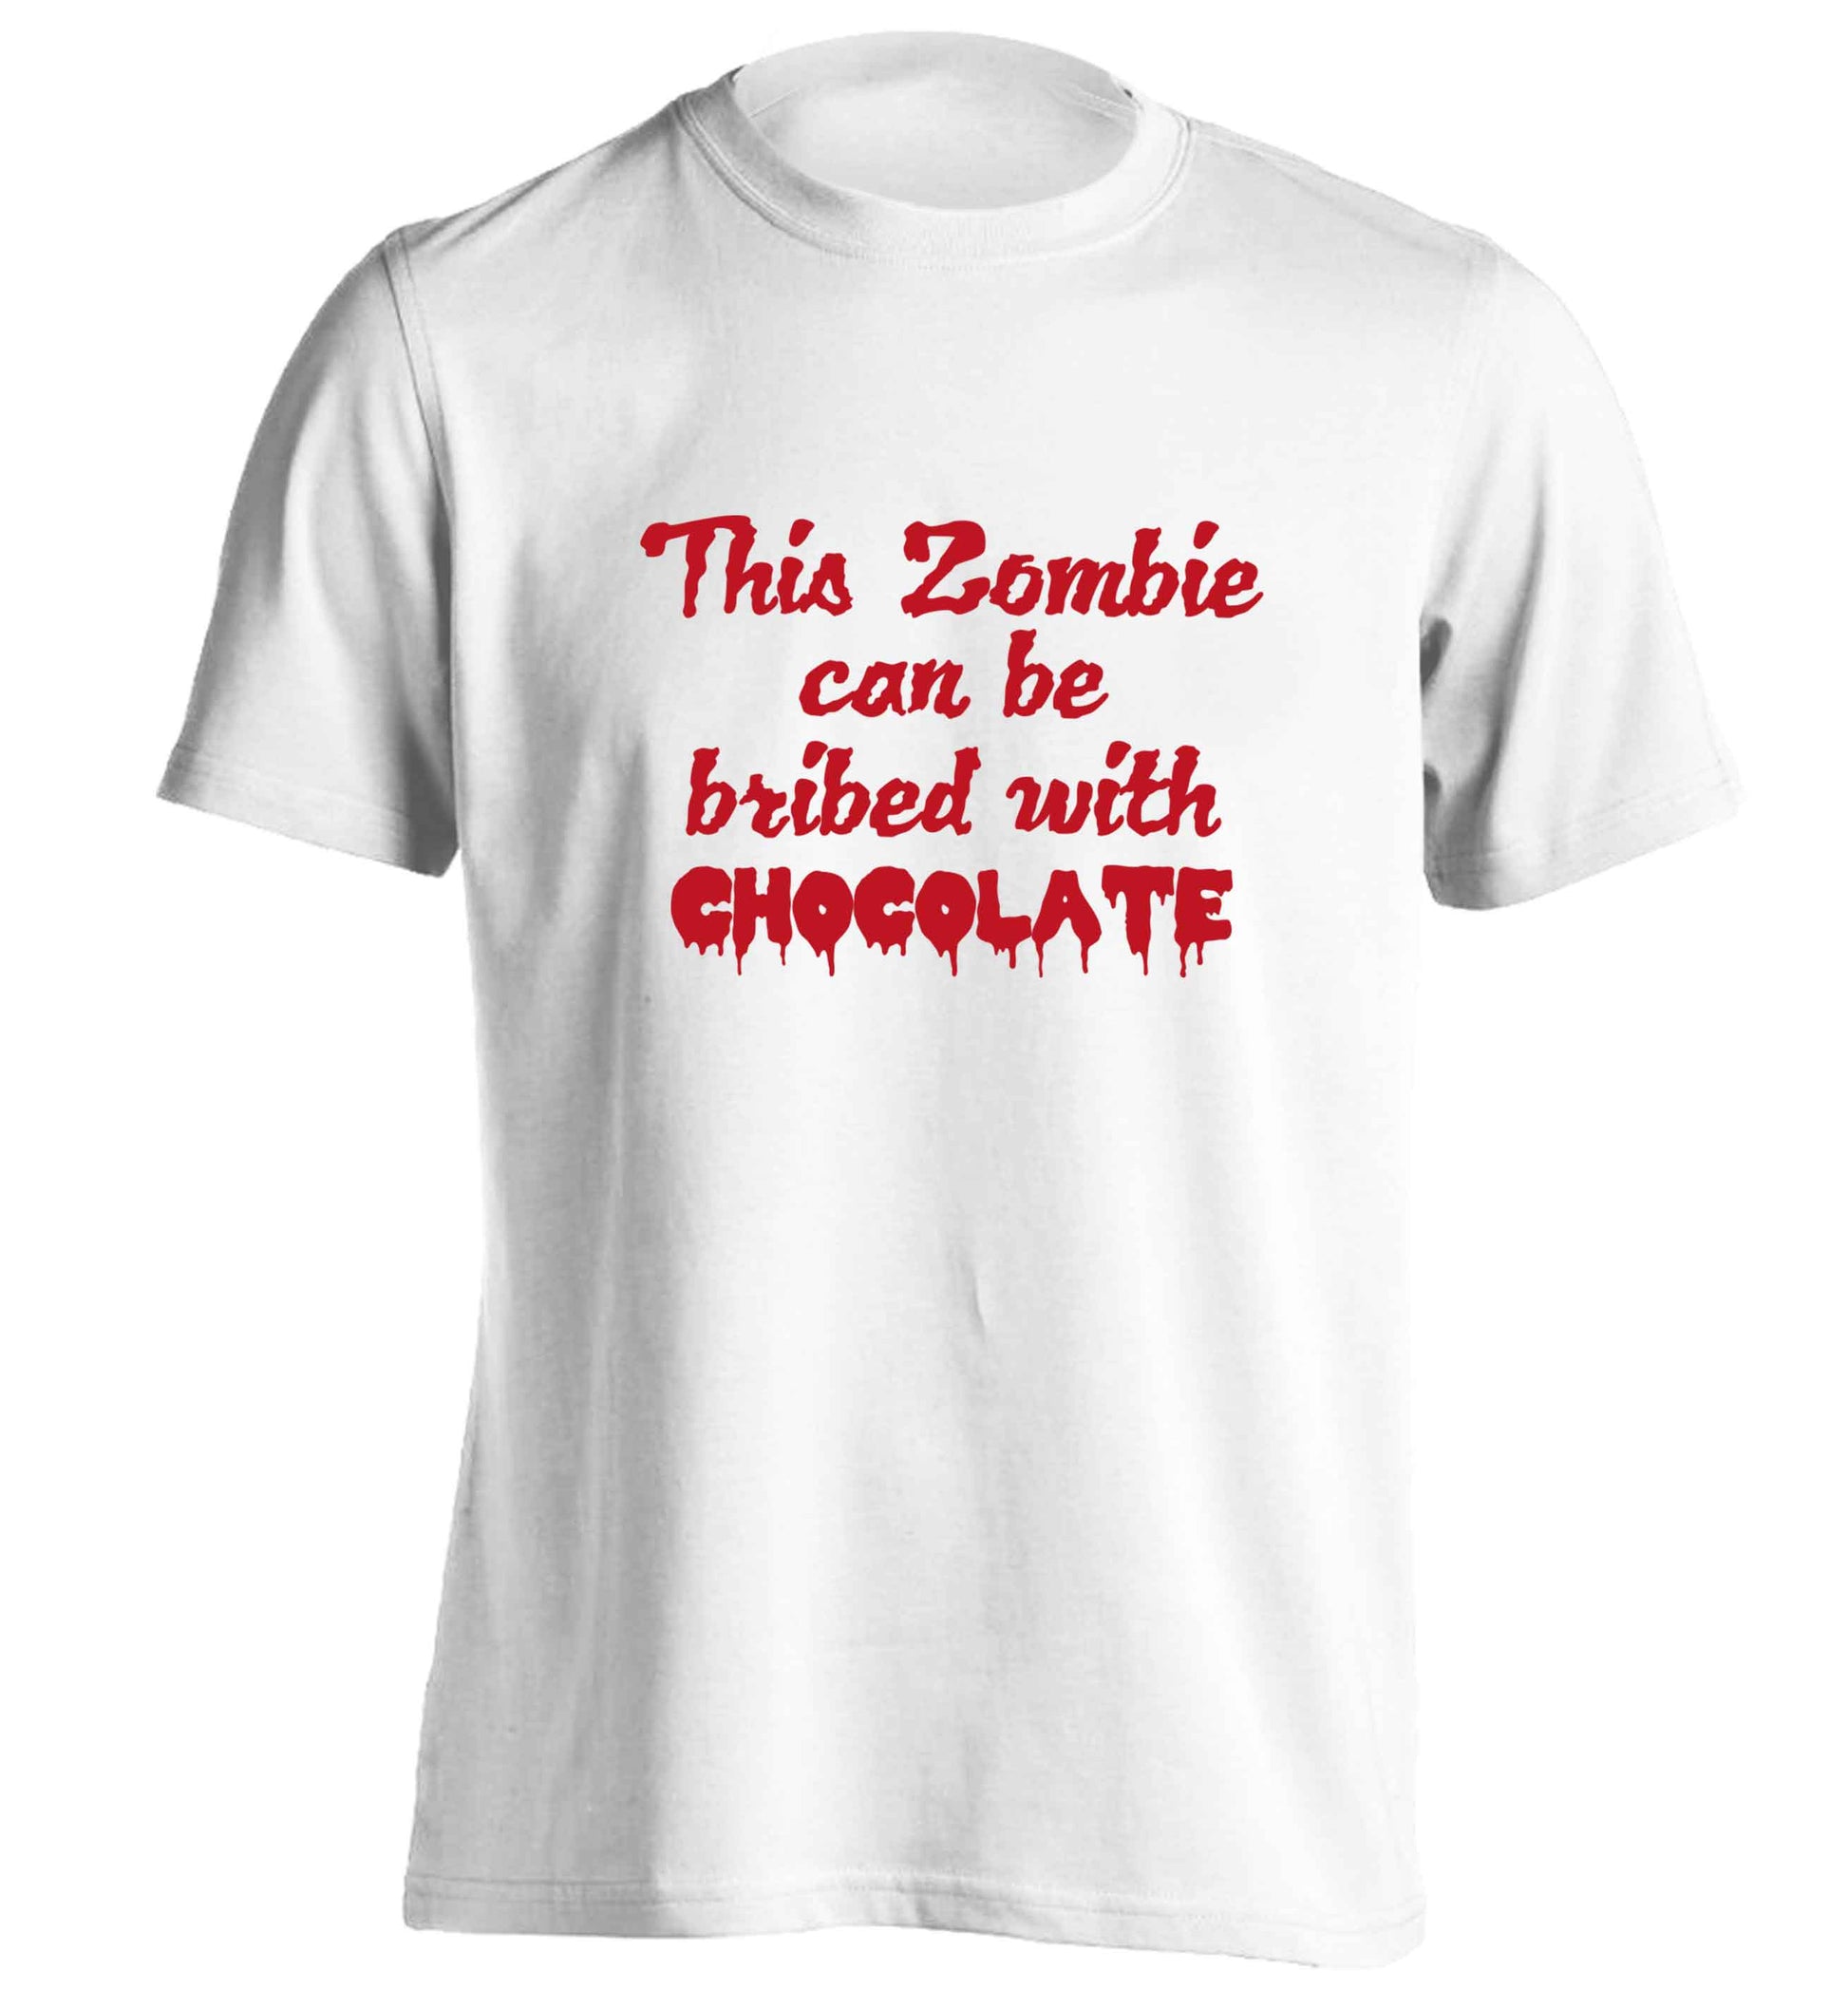 This zombie can be bribed with chocolate adults unisex white Tshirt 2XL